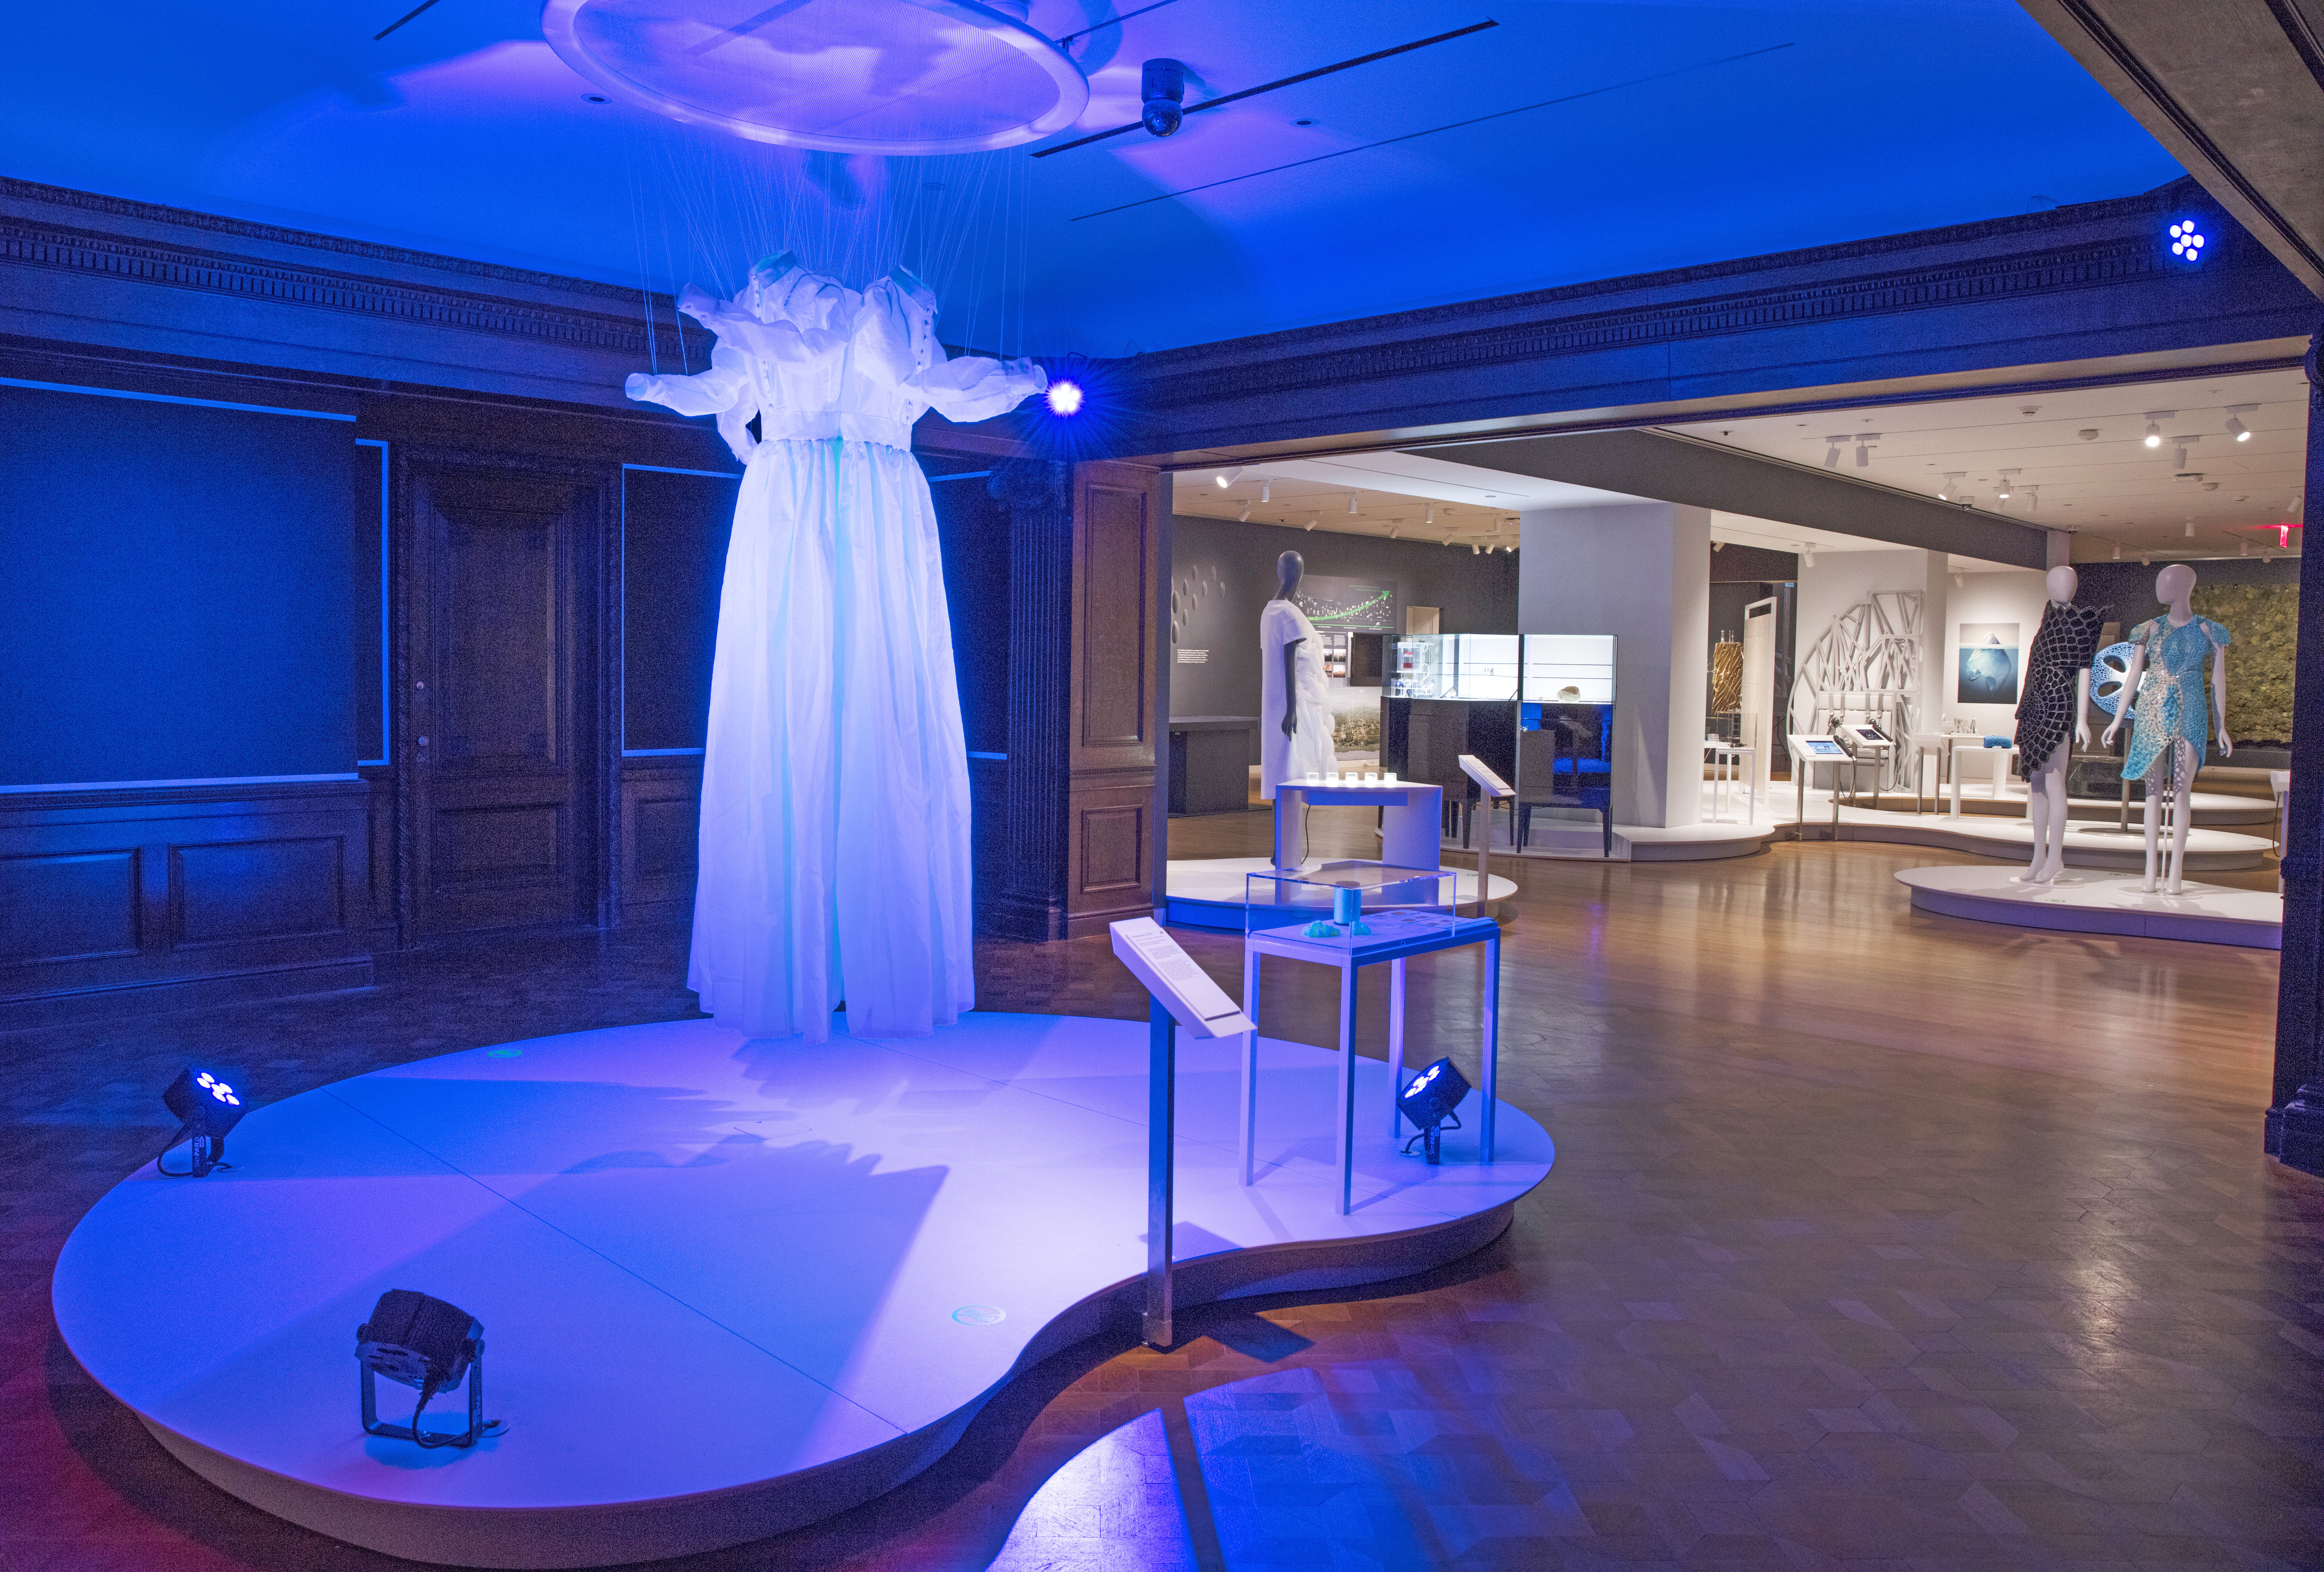 Two conjoined prairie dresses, glowing blue, are suspended from the ceiling.